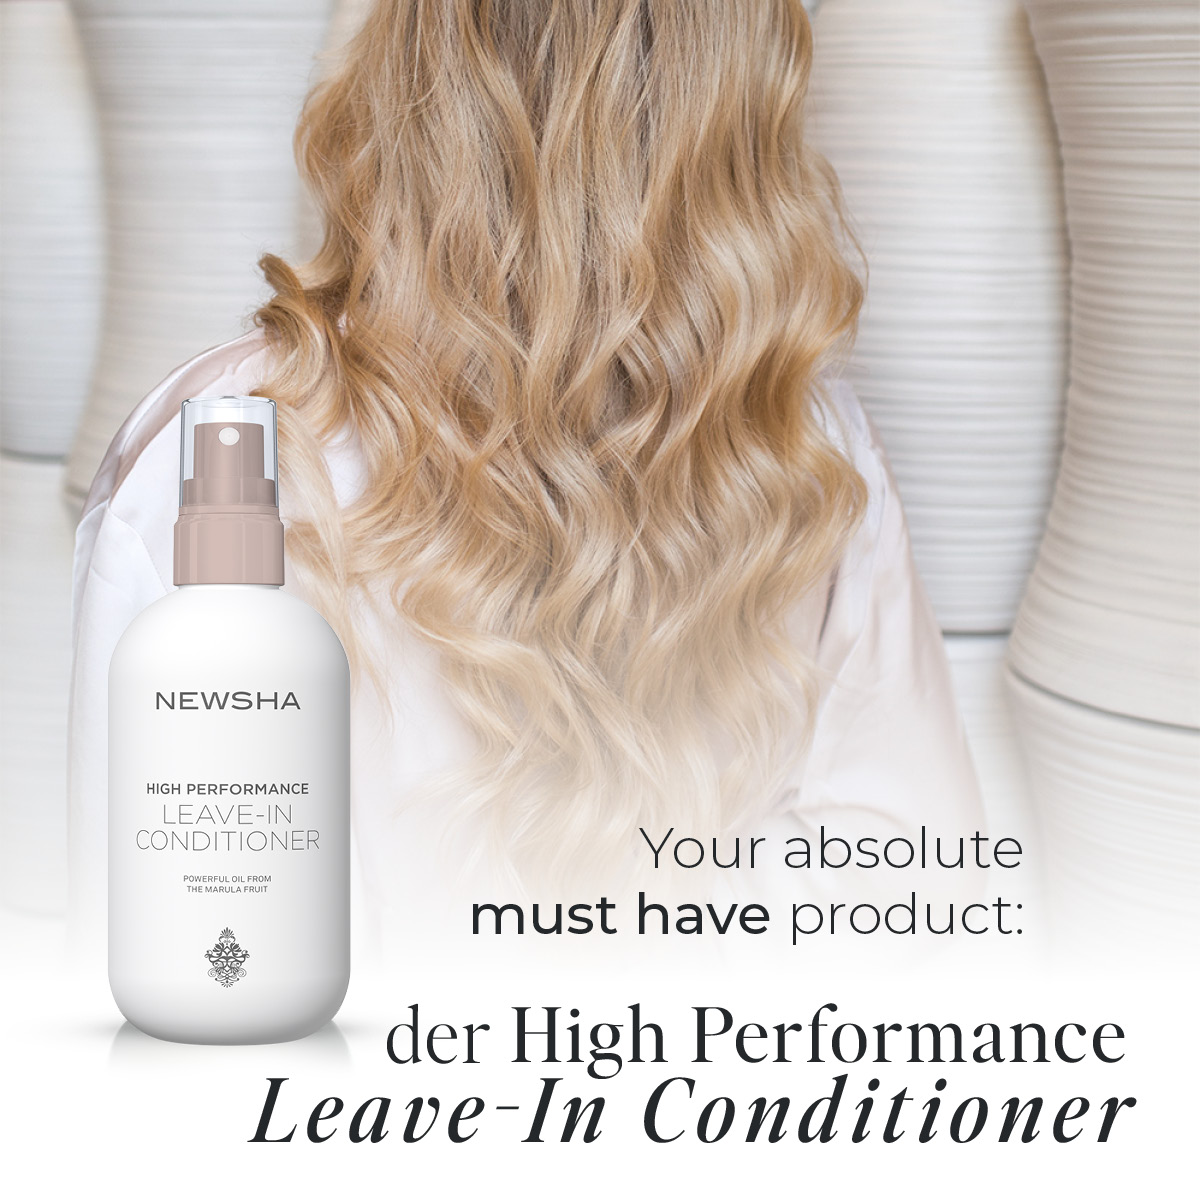 Your absolute must have product: der High Performance Leave-In Conditioner